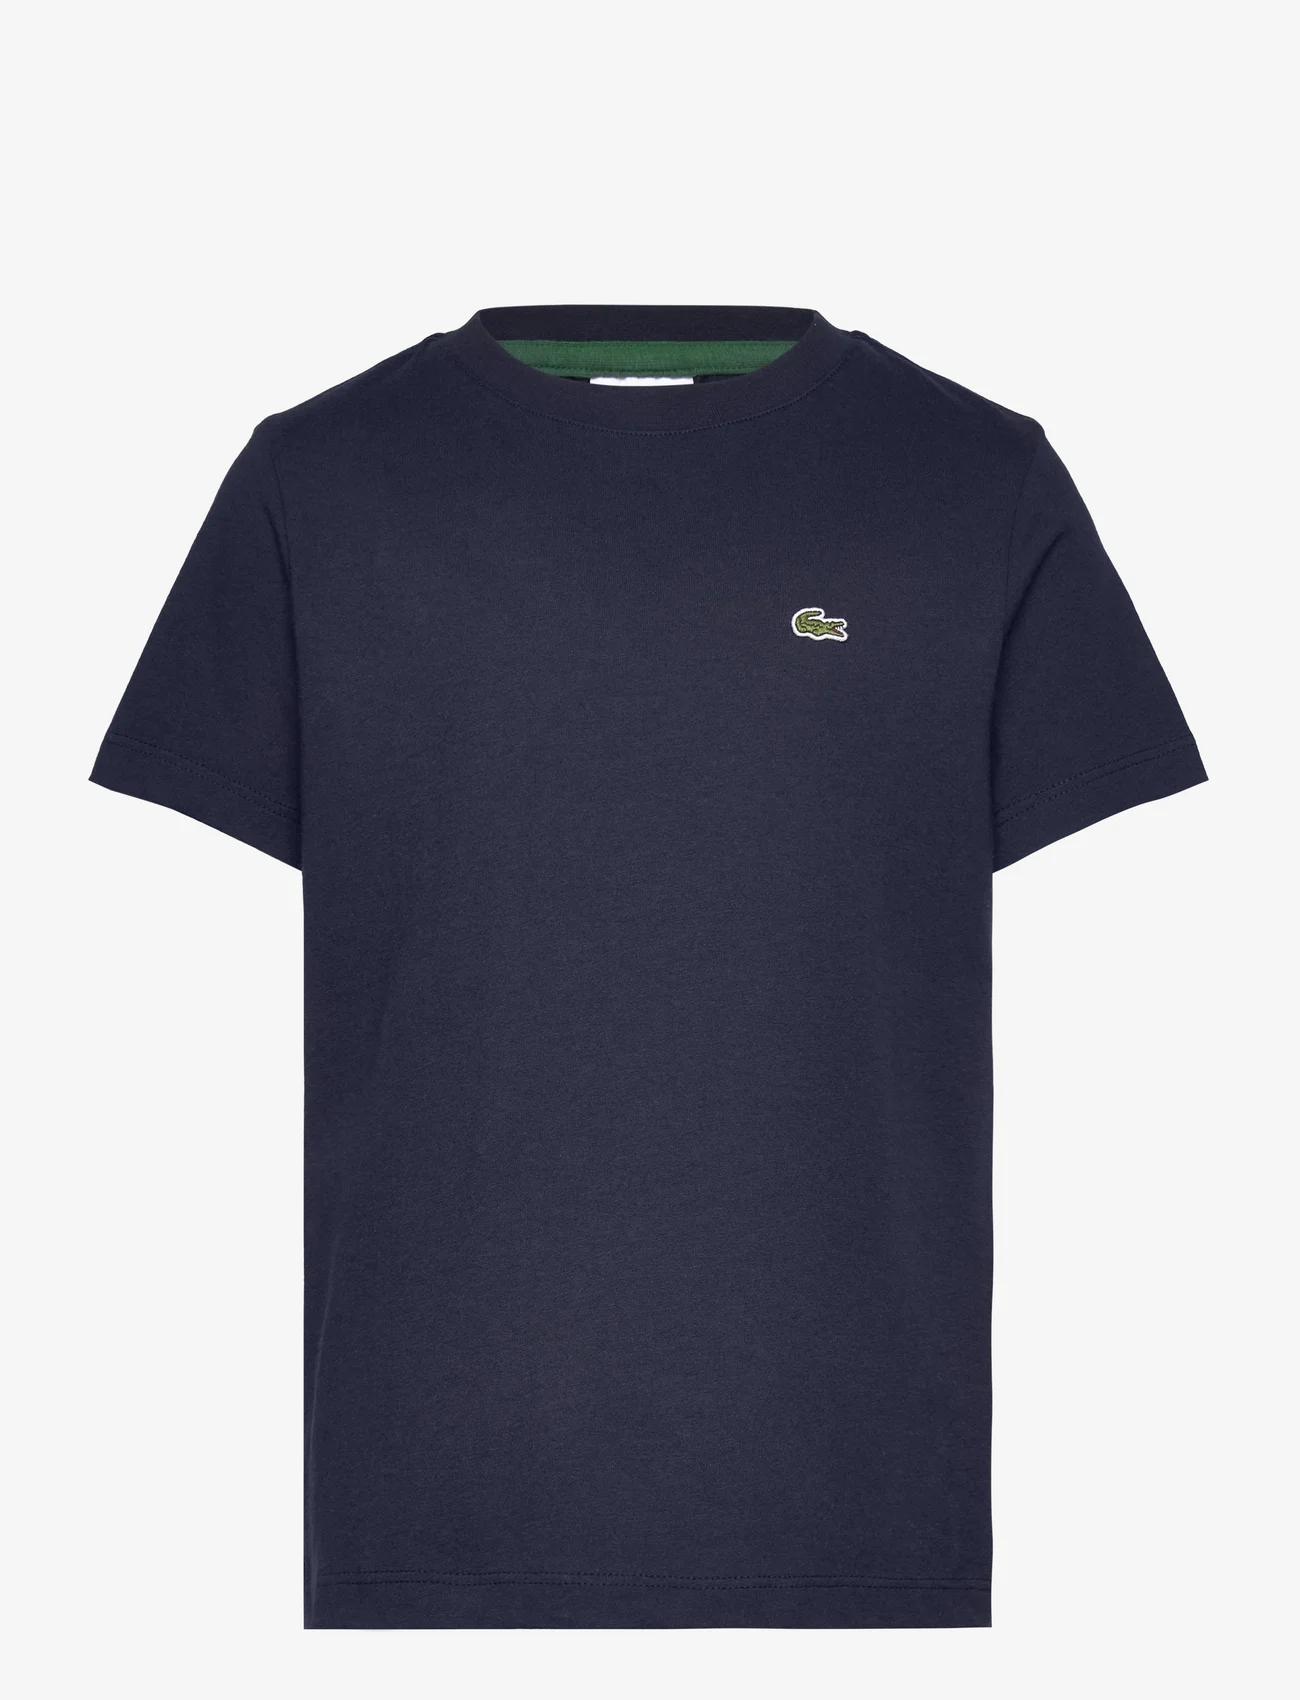 Lacoste - TEE-SHIRT&TURTLE - short-sleeved t-shirts - navy blue - 0